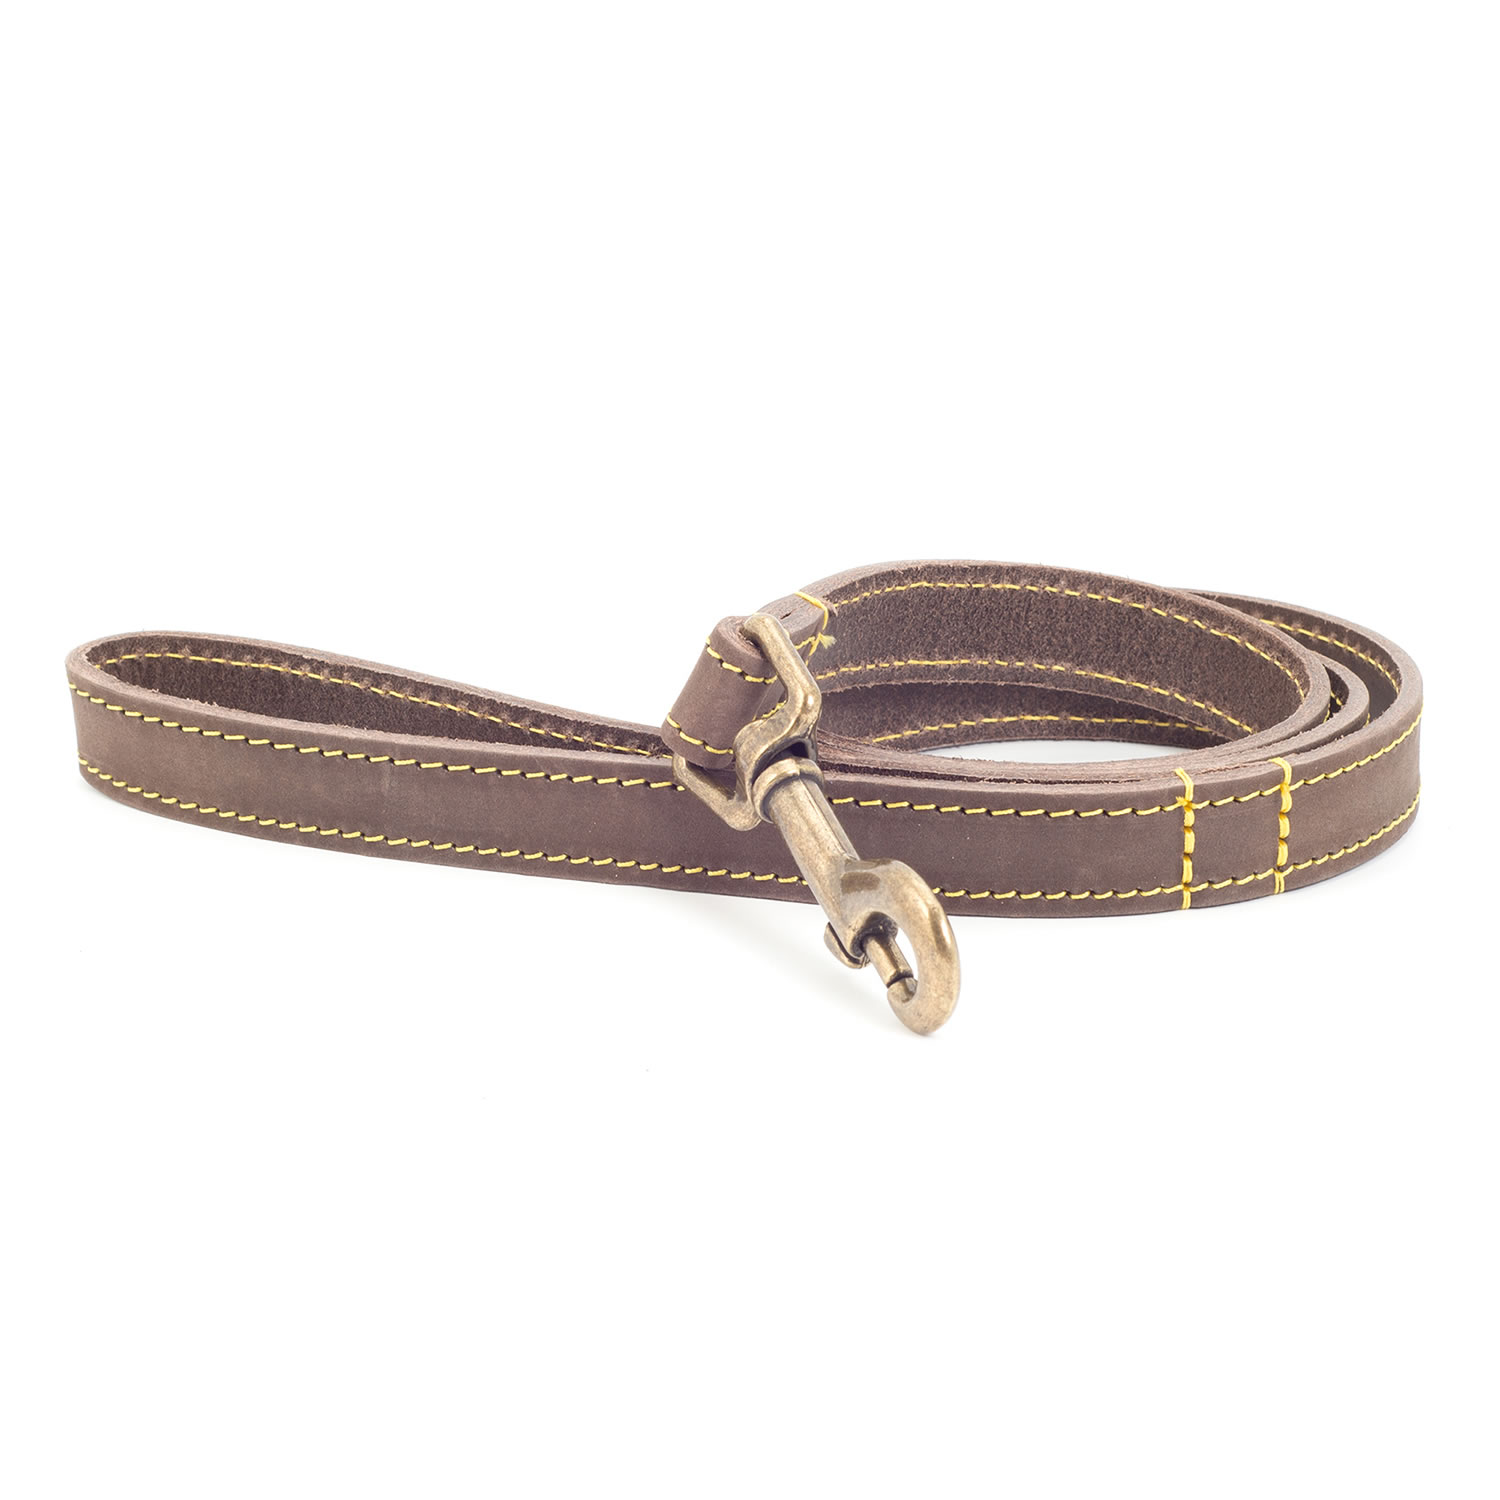 ANCOL TIMBERWOLF LEATHER LEAD  ANCOL TIMBERWOLF LEATHER LEAD  1 M X 19 MM SABLE 1 M X 19 MM